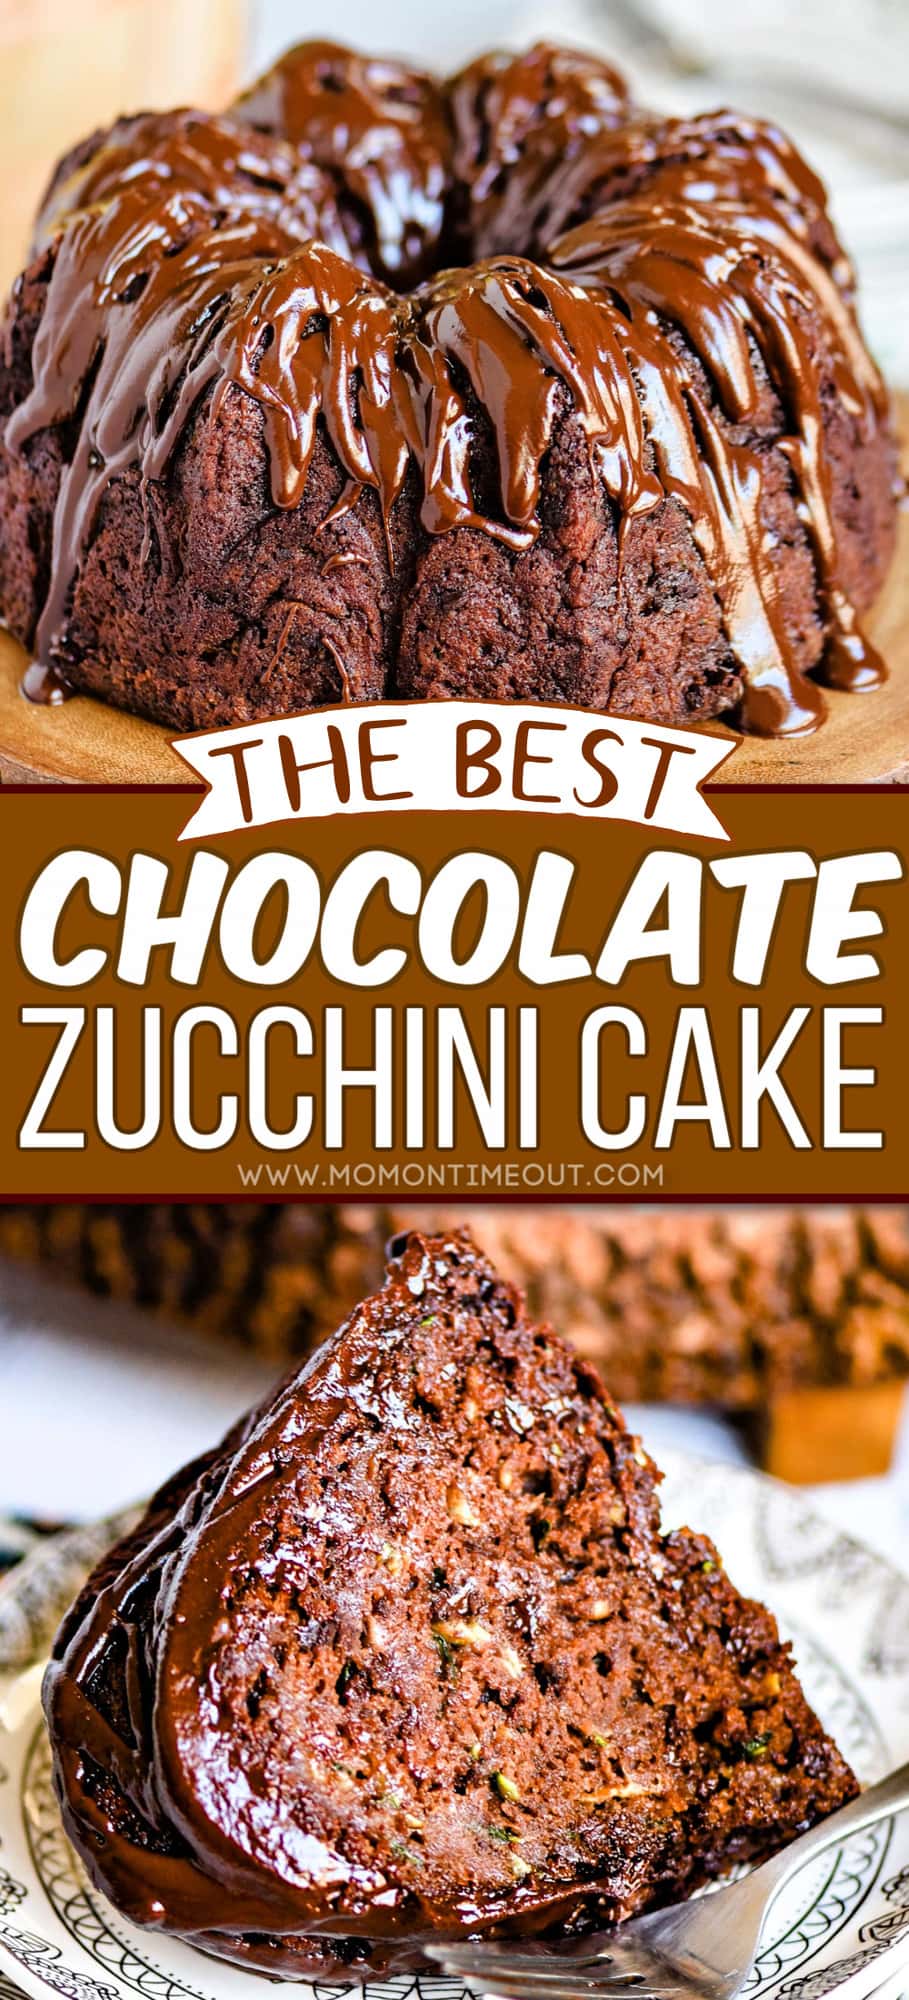 The BEST Chocolate Zucchini Cake | Mom On Timeout